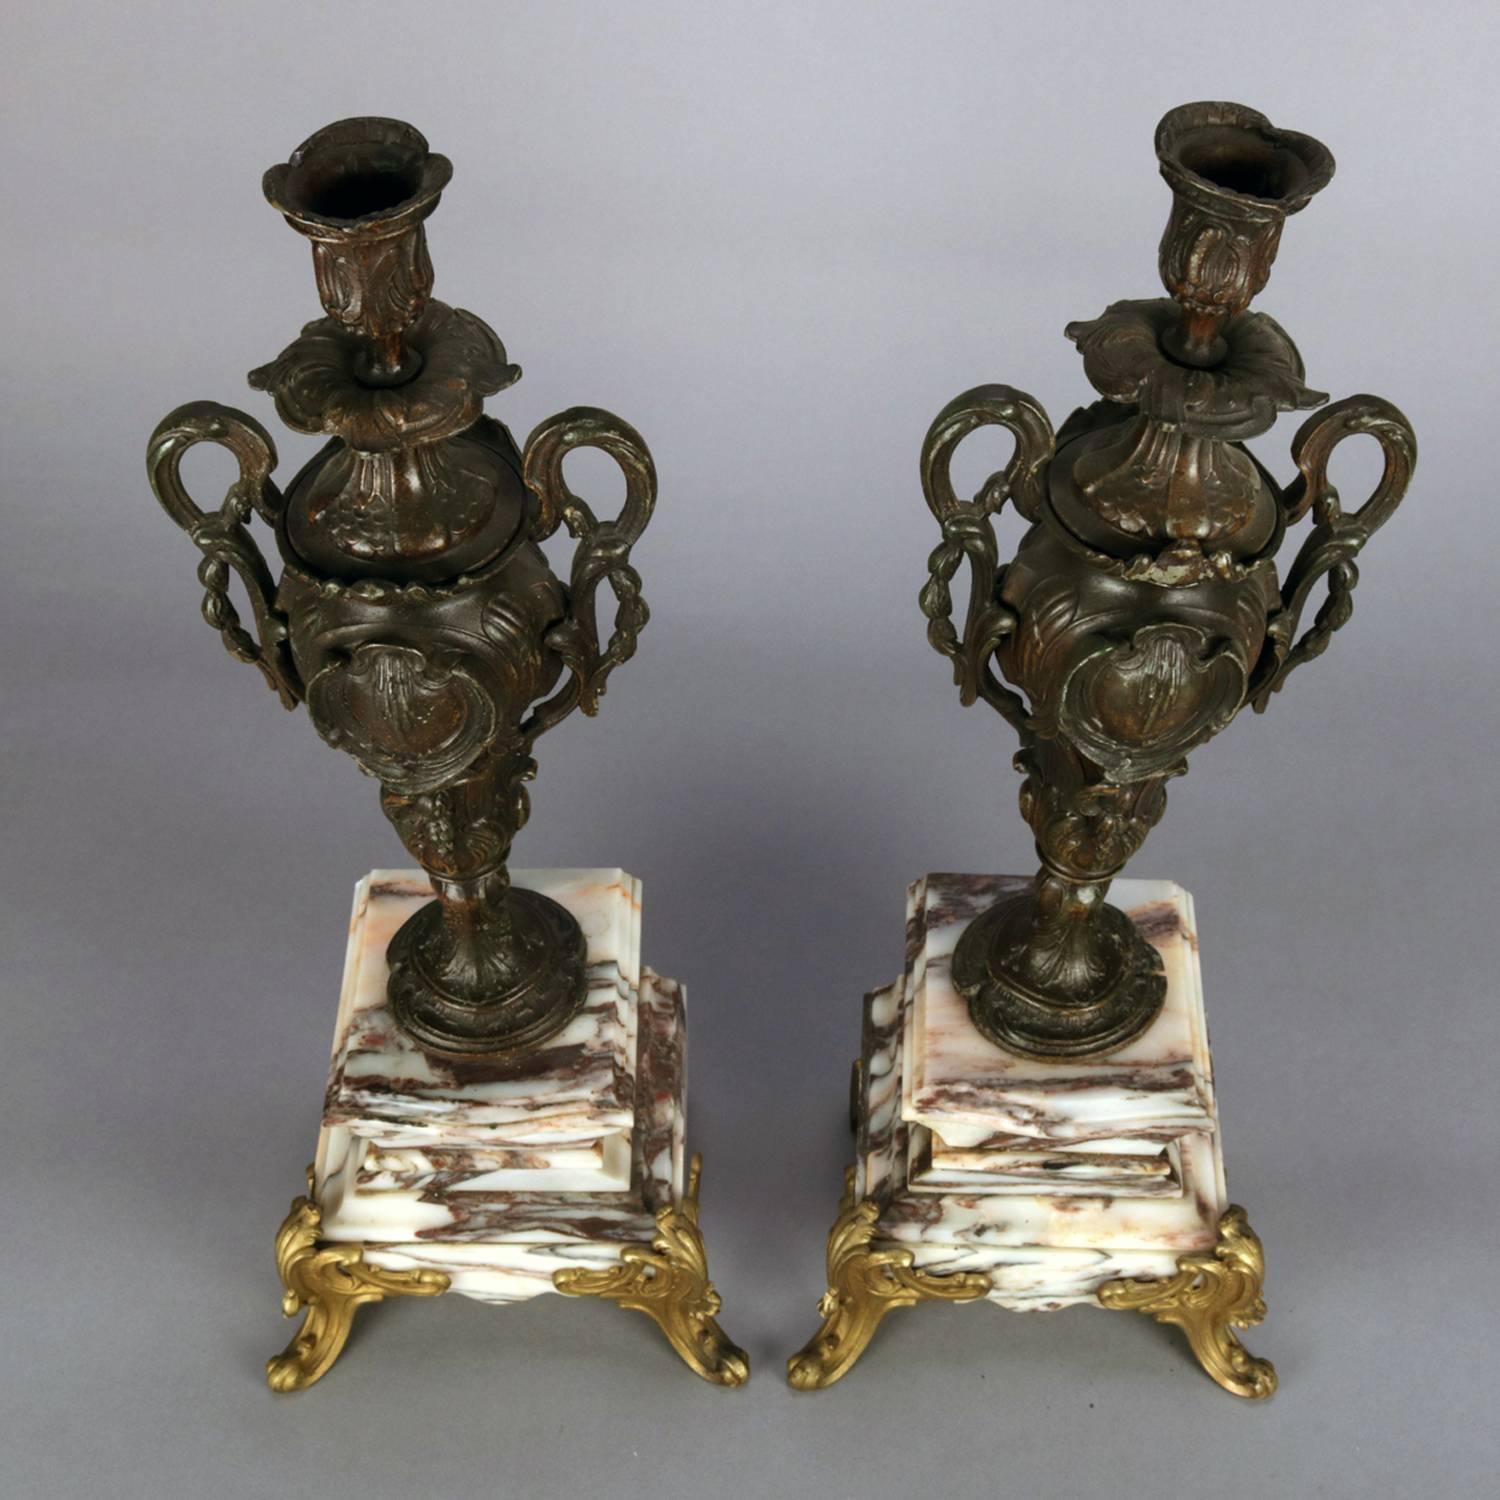 Antique pair of classical candle sticks feature cast bronze double handle urn form with embossed scroll and foliate reserves, seated on deeply variegated marble base with gilt legs, circa 1890.

Measures: 18.5